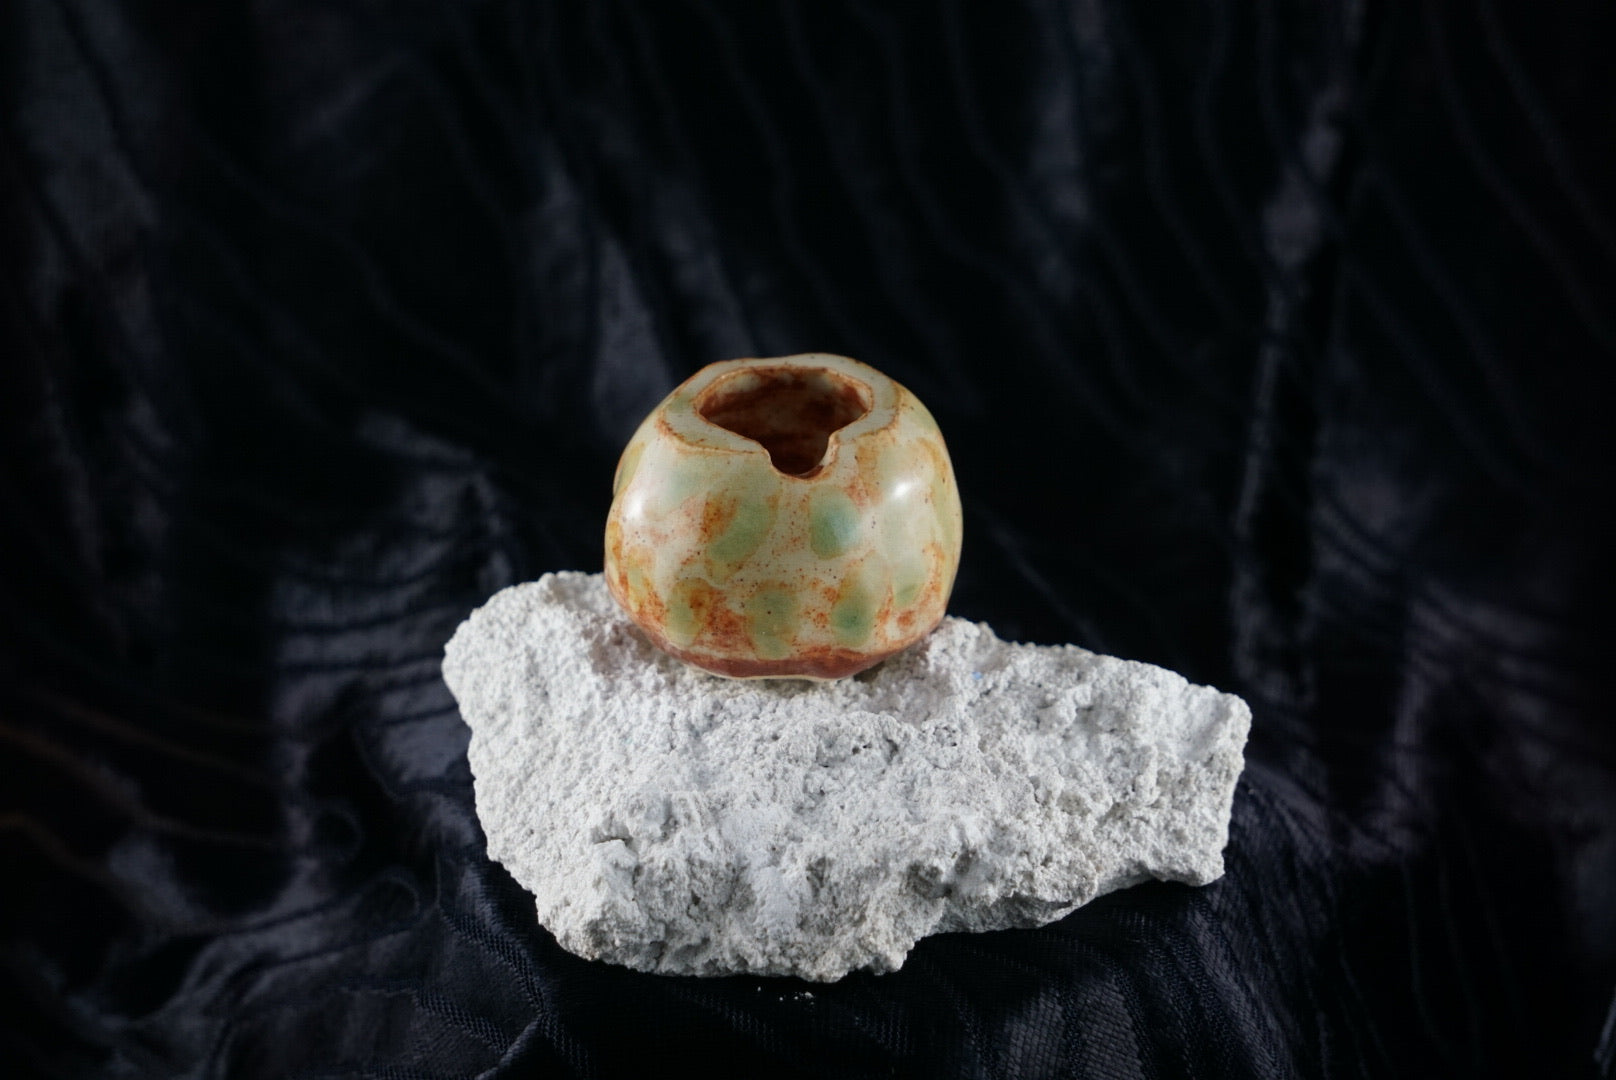 Small, handmade, orange/brown and green ceramic ashtray molded around a piece of white rock.